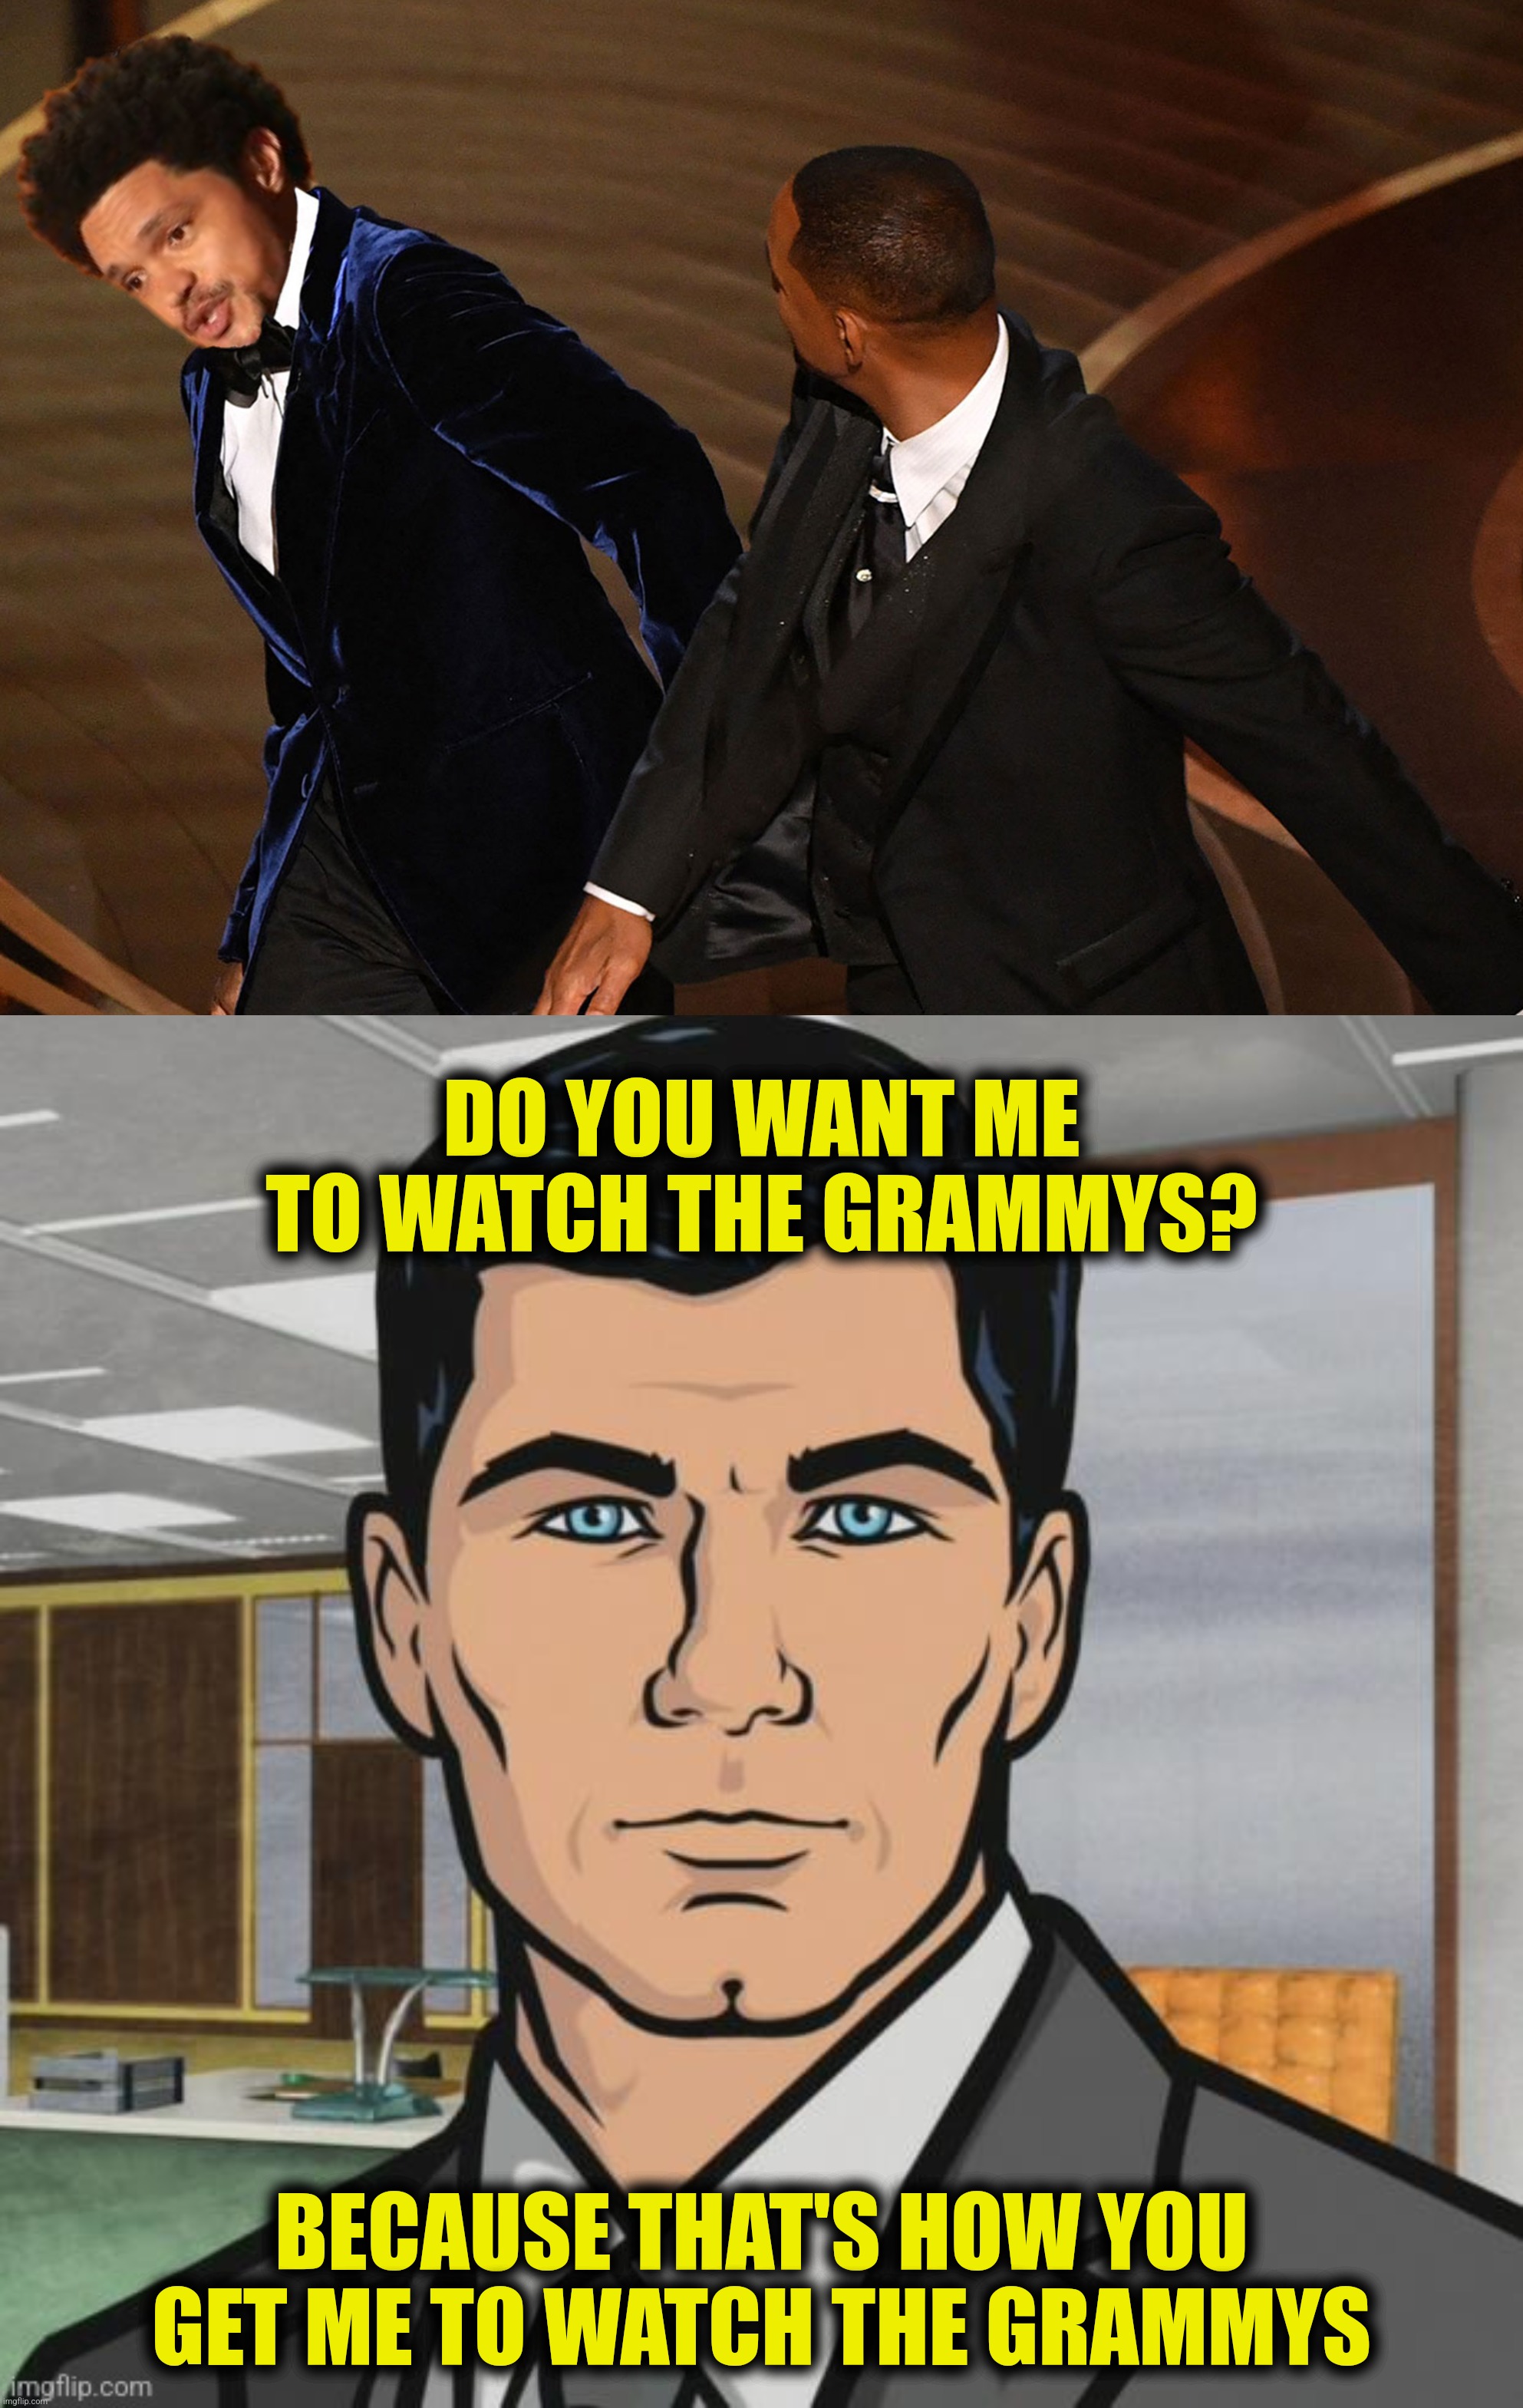 The hits just keep coming! | DO YOU WANT ME TO WATCH THE GRAMMYS? BECAUSE THAT'S HOW YOU GET ME TO WATCH THE GRAMMYS | image tagged in bad photoshop,trevor noah,oscars,grammys | made w/ Imgflip meme maker